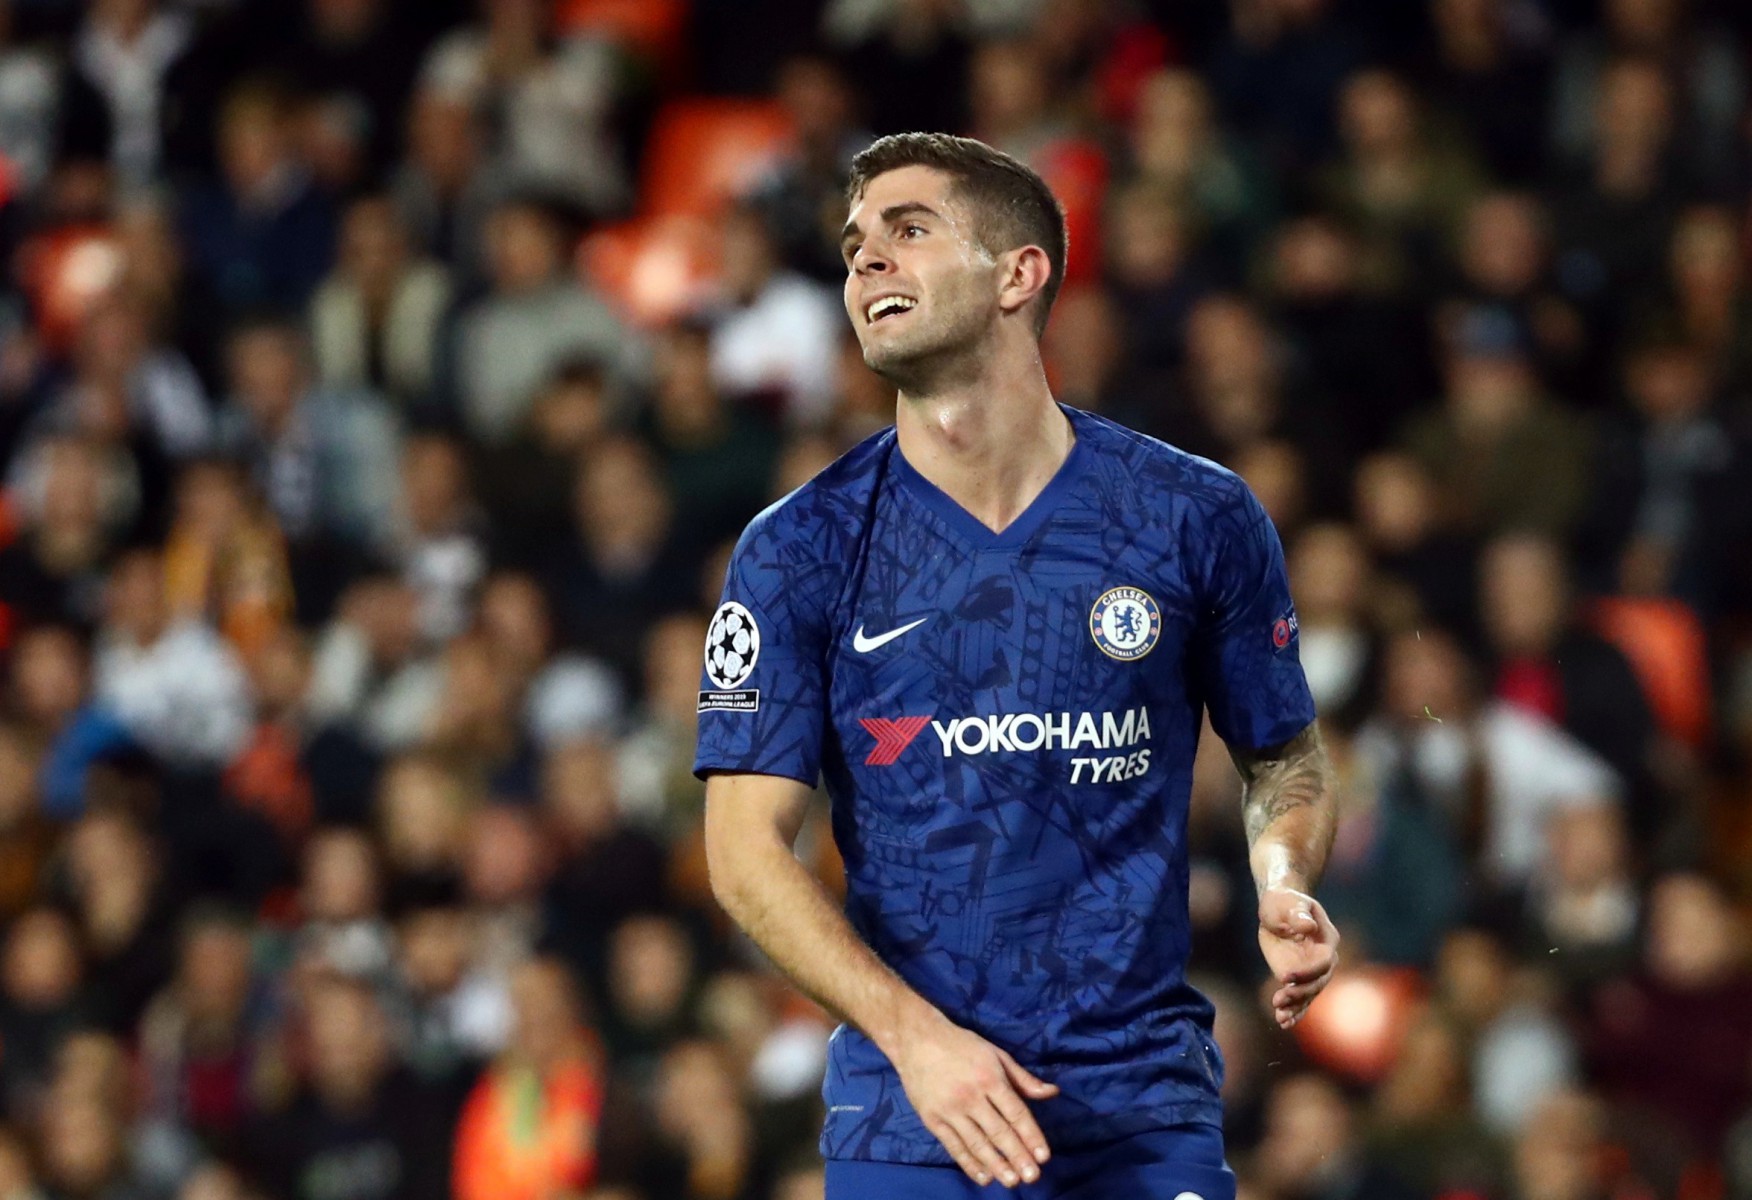 Christian Pulisic shone again as he continued his excellent form for Chelsea